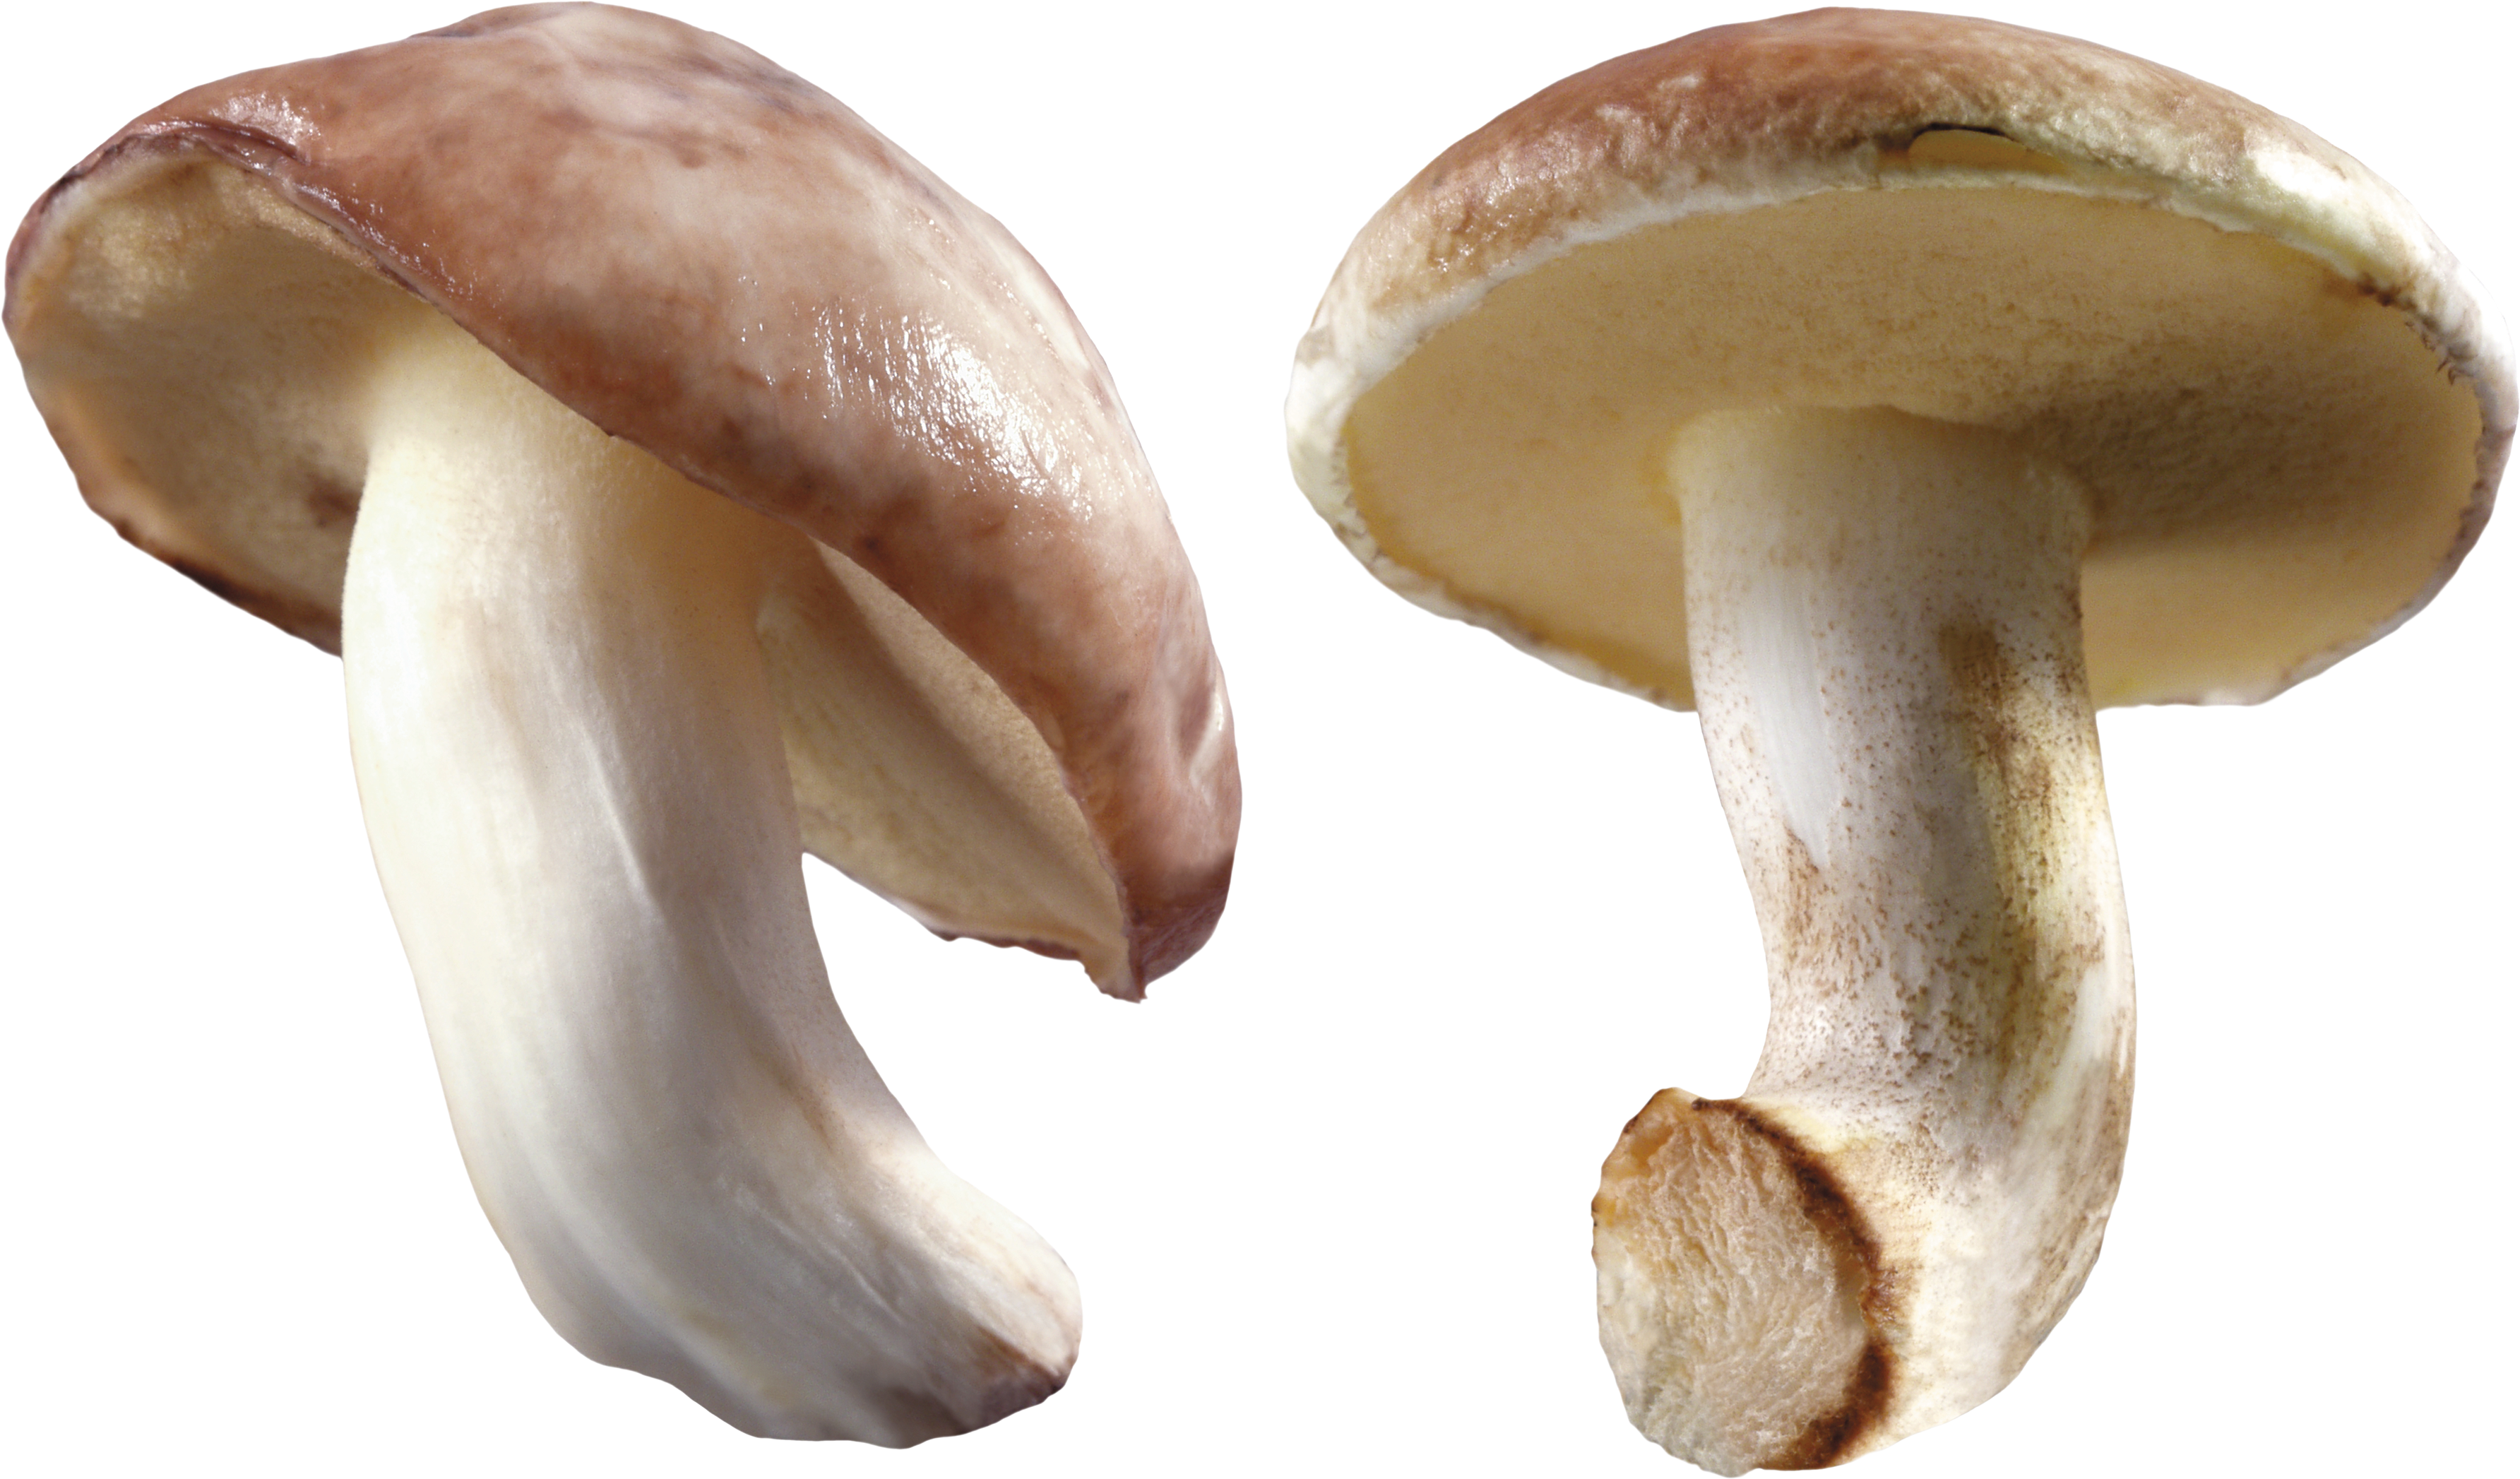 Mushroom Png by Moonglowlilly